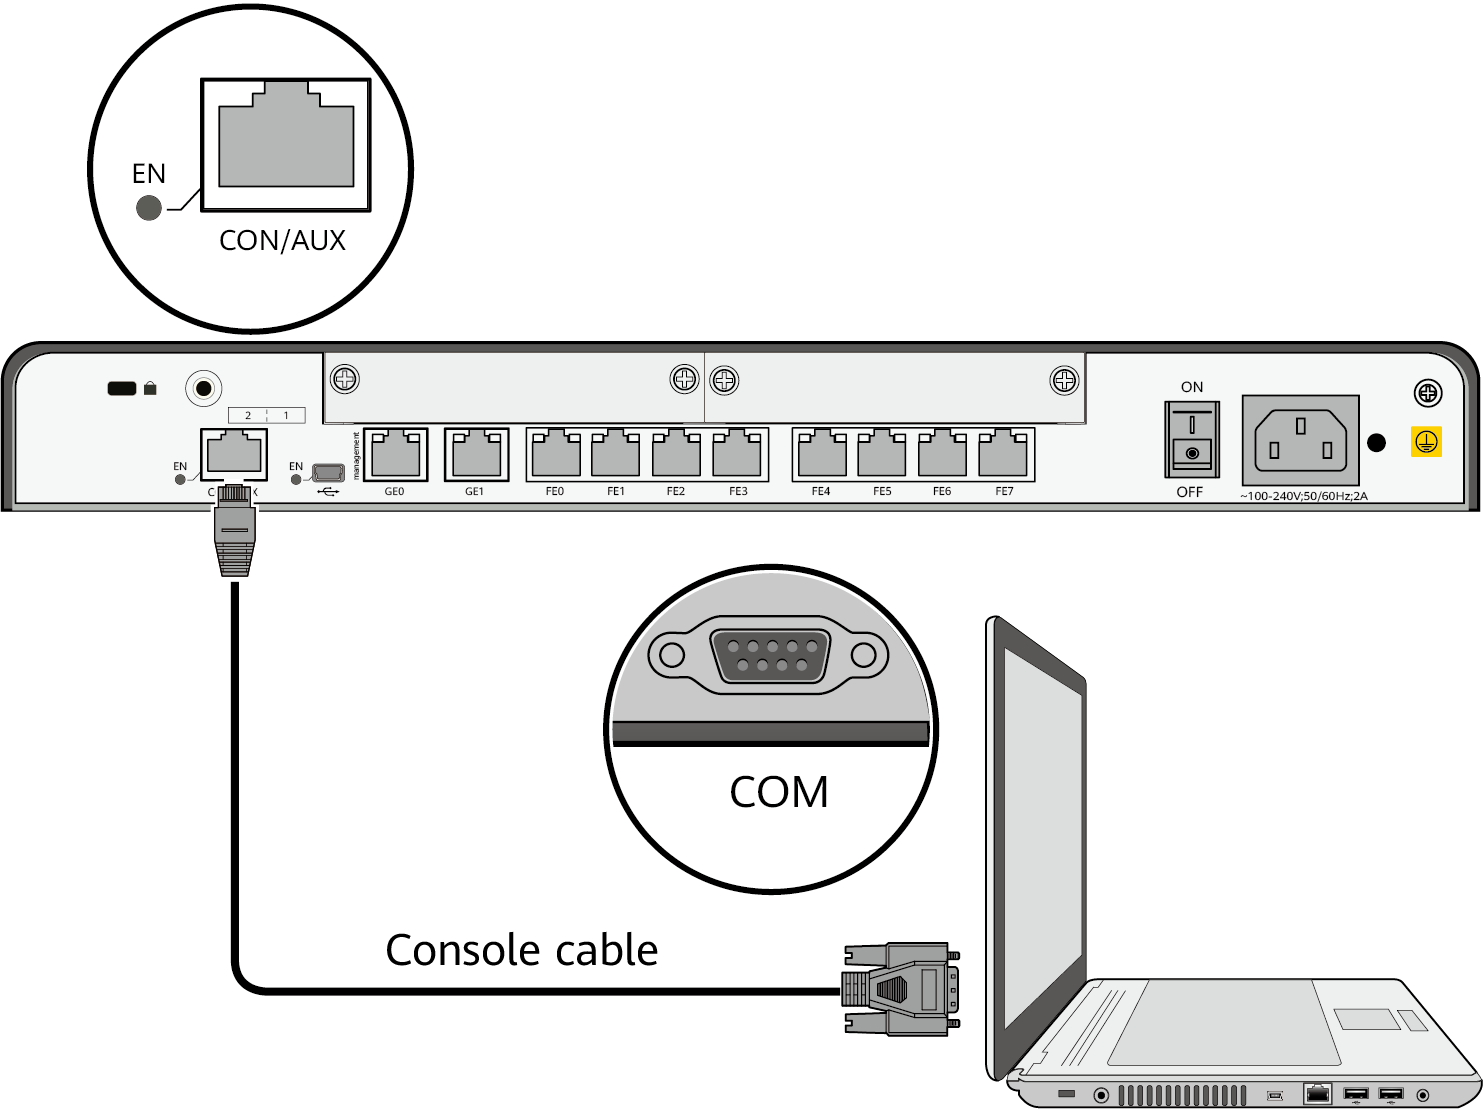 Console connect. Коммутатор Huawei ar 1200. Huawei ar600 Console Cable. Консоль Huawei маршрутизатора. DFL 870 Console Cable.